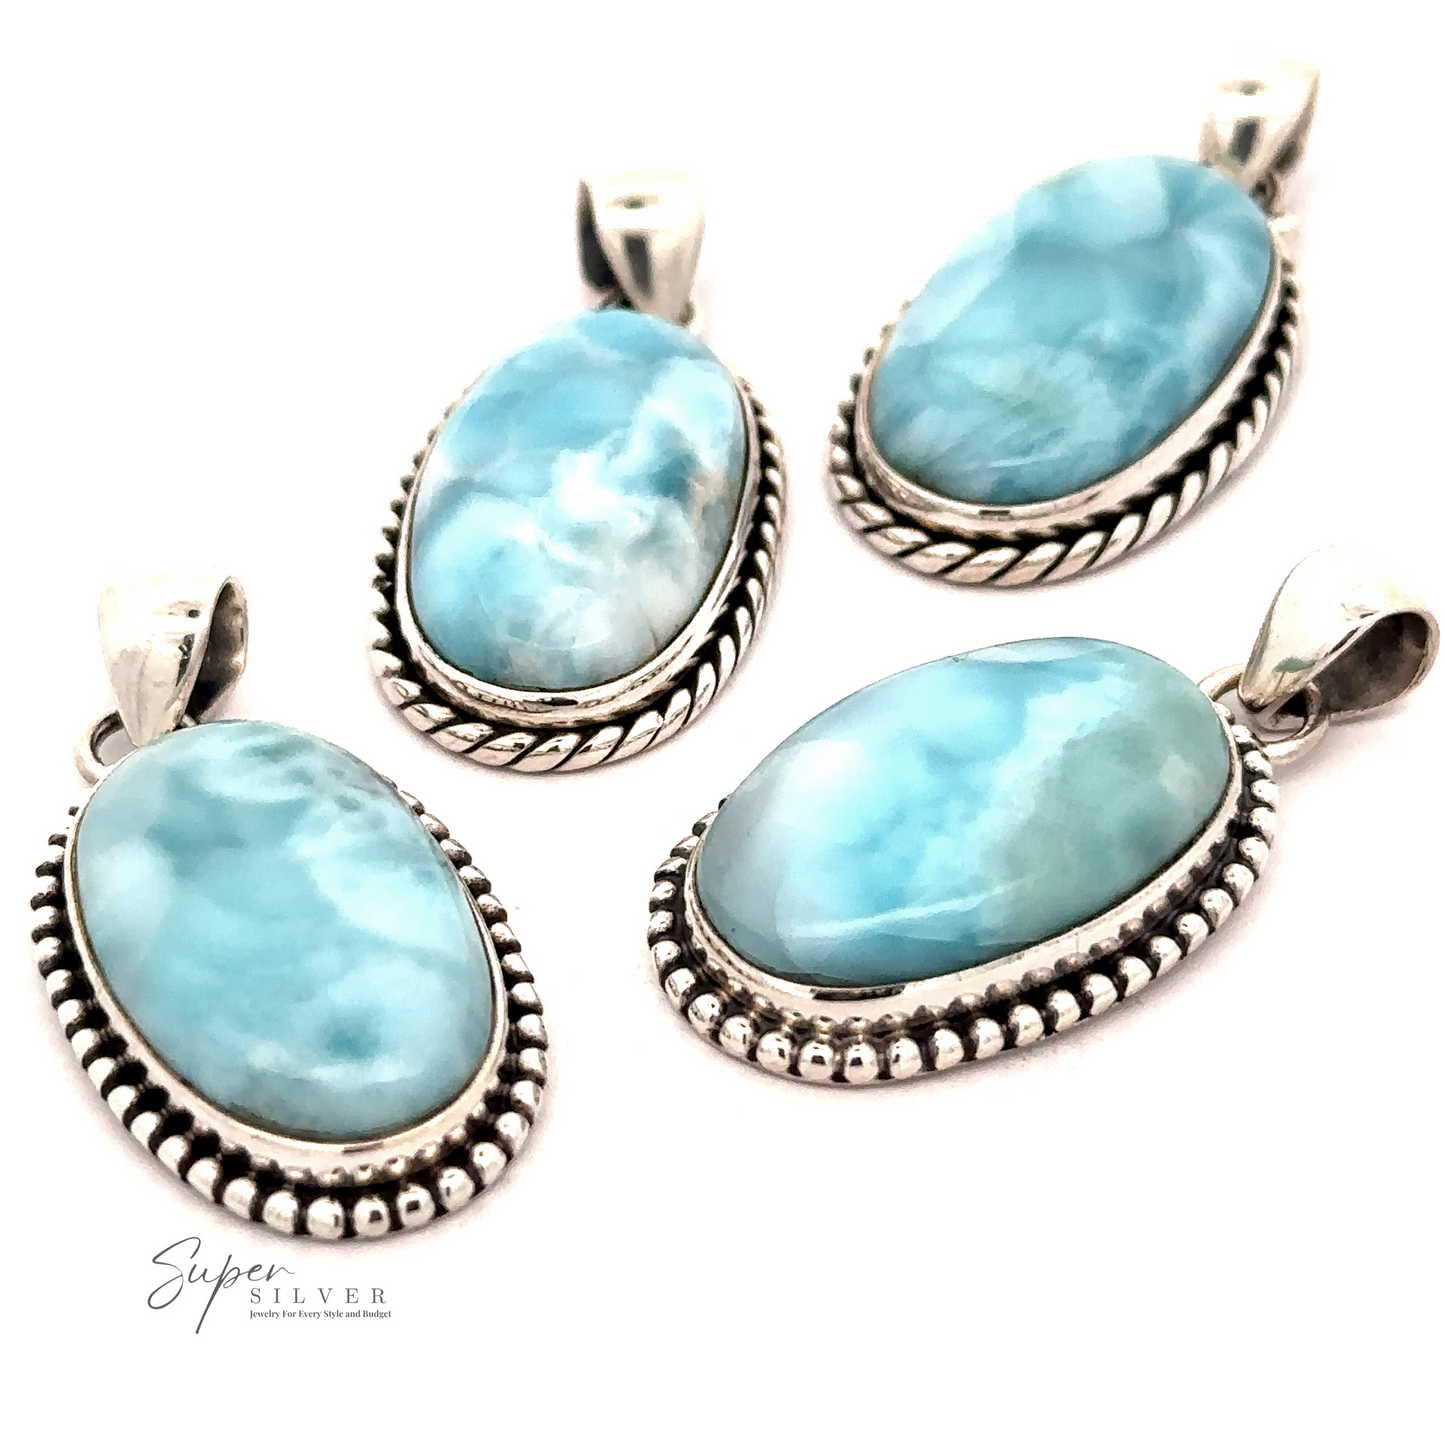 Four sterling silver pendants with blue oval gemstones are displayed against a white background. The Larimar Oval Pendant with Ball or Rope Border showcases different decorative silver borders.